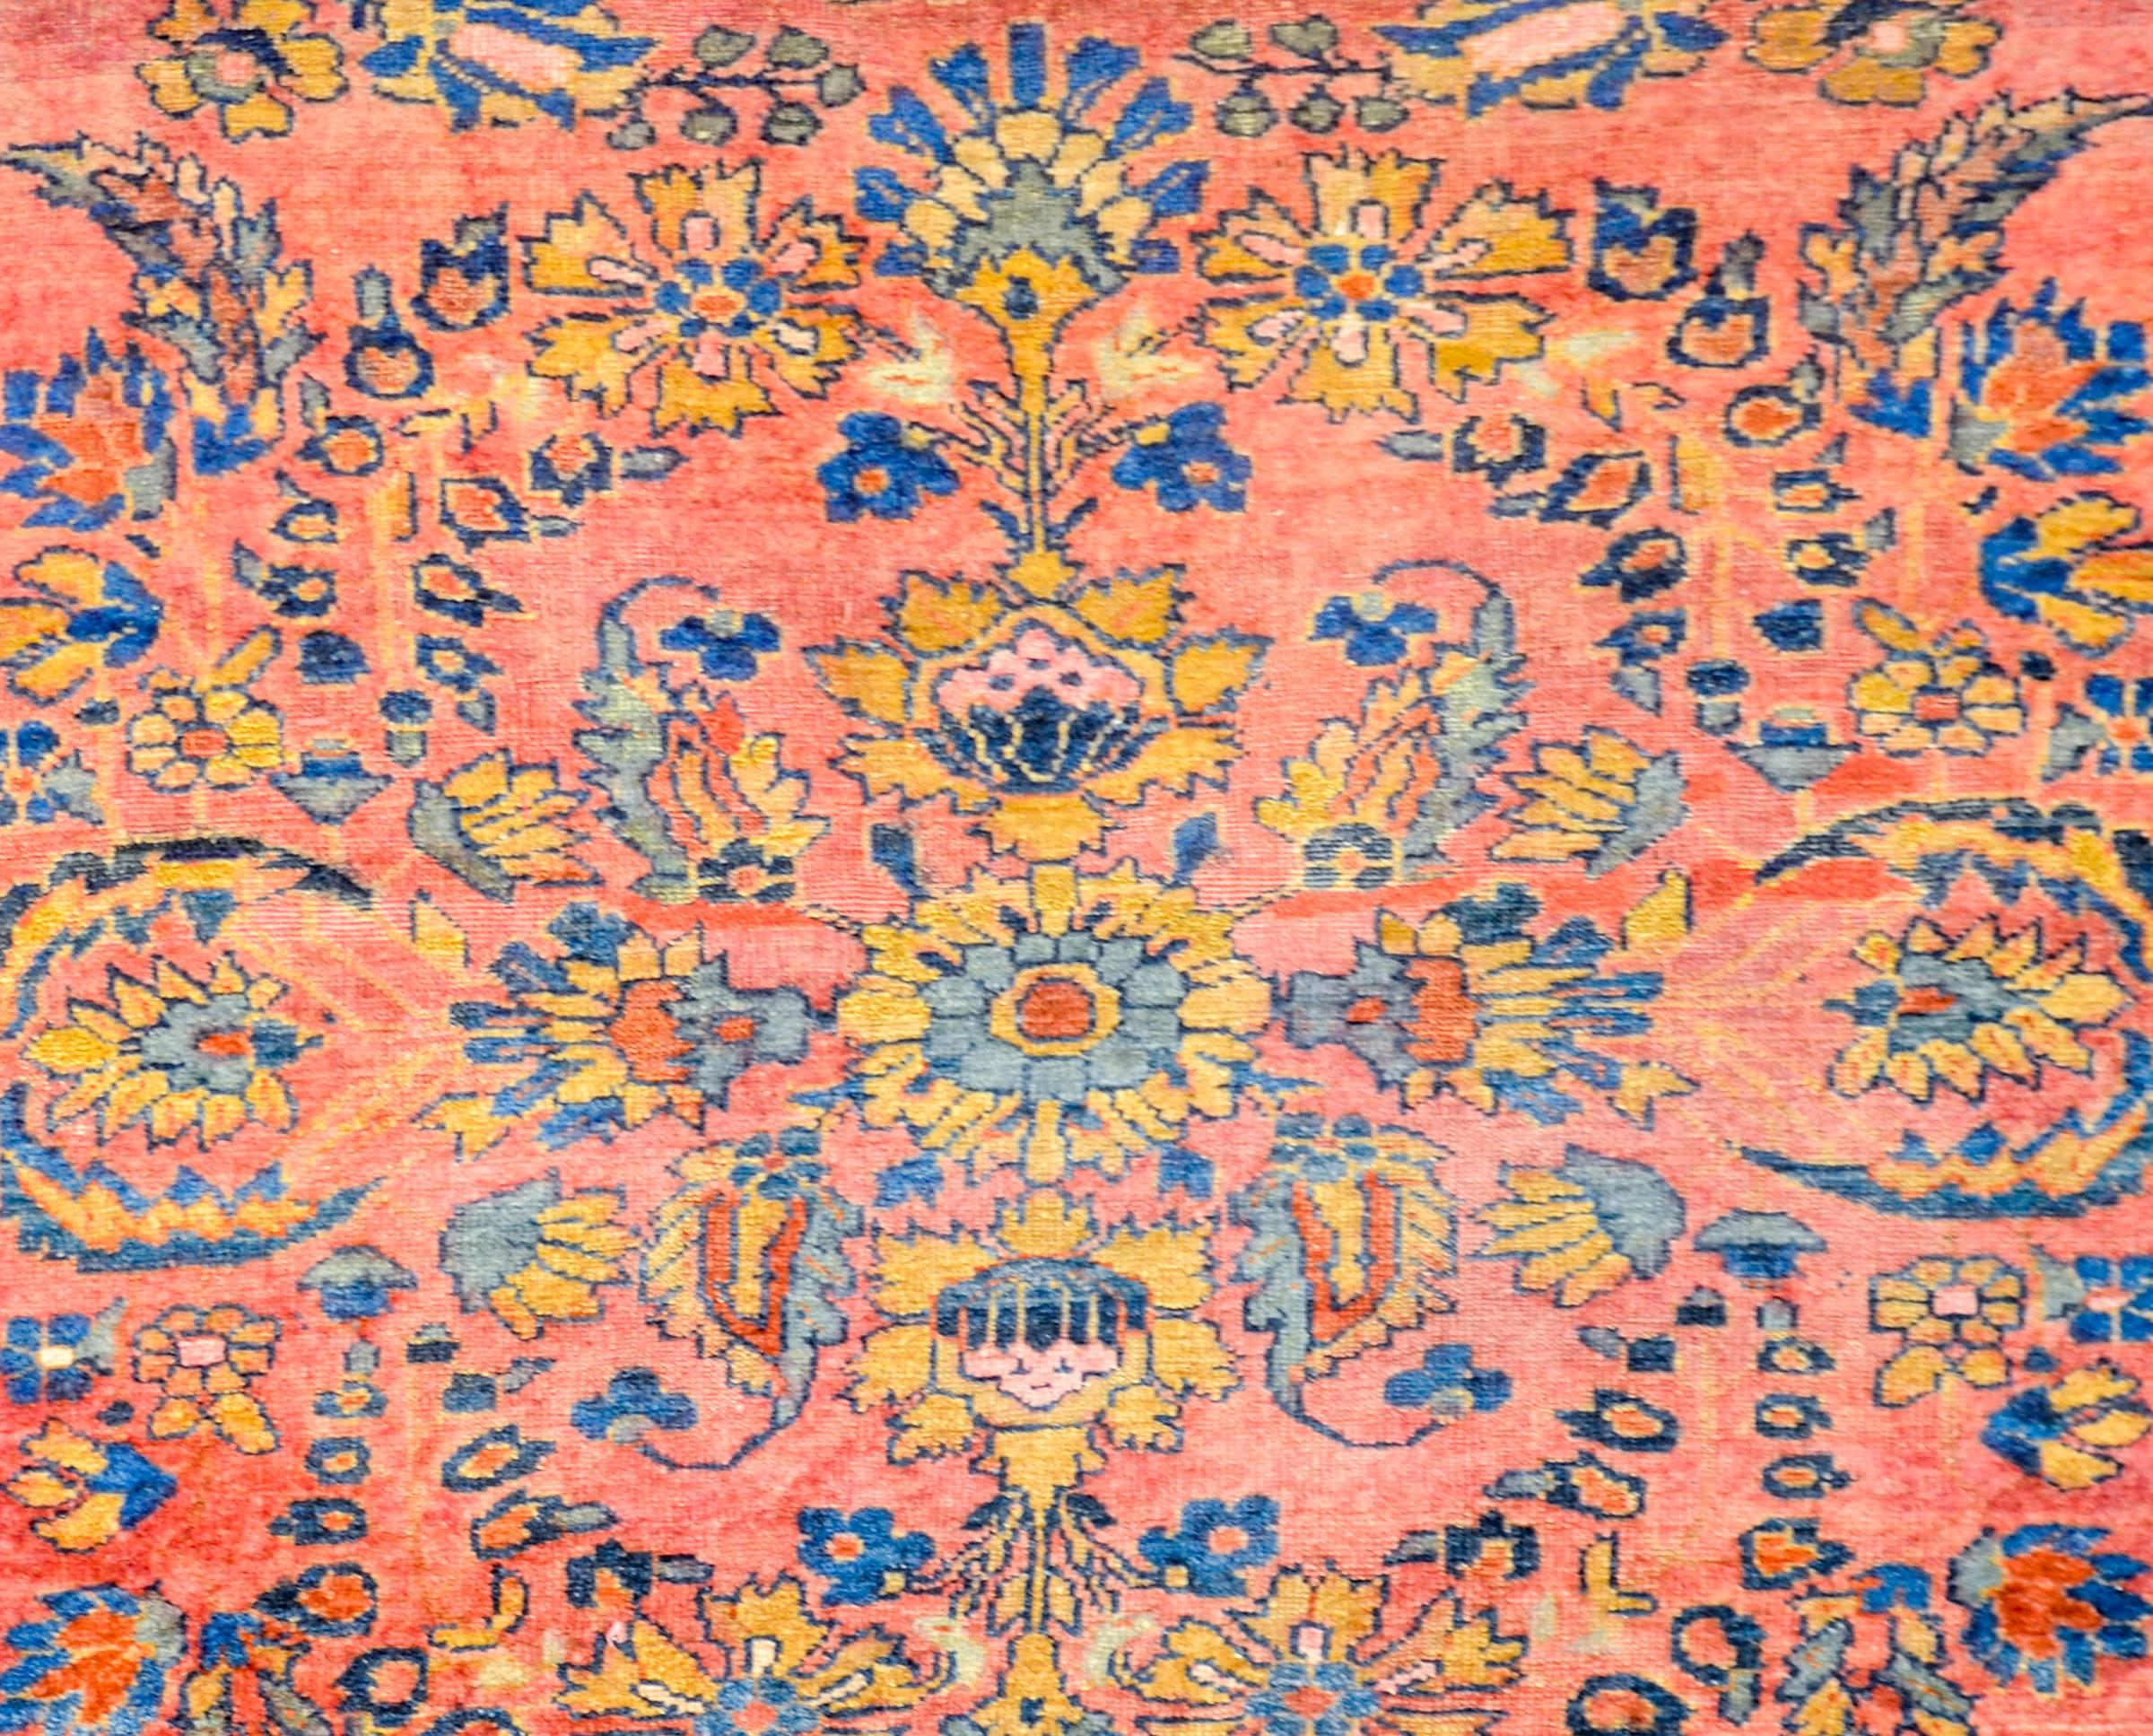 An early 20th century Persian Lilihan rug with sweet all-over floral pattern woven in indigo, orange, yellow and pink vegetable dyed wool. The border is contrasting with a large-scale floral and leaf pattern woven on a dark indigo background flanked